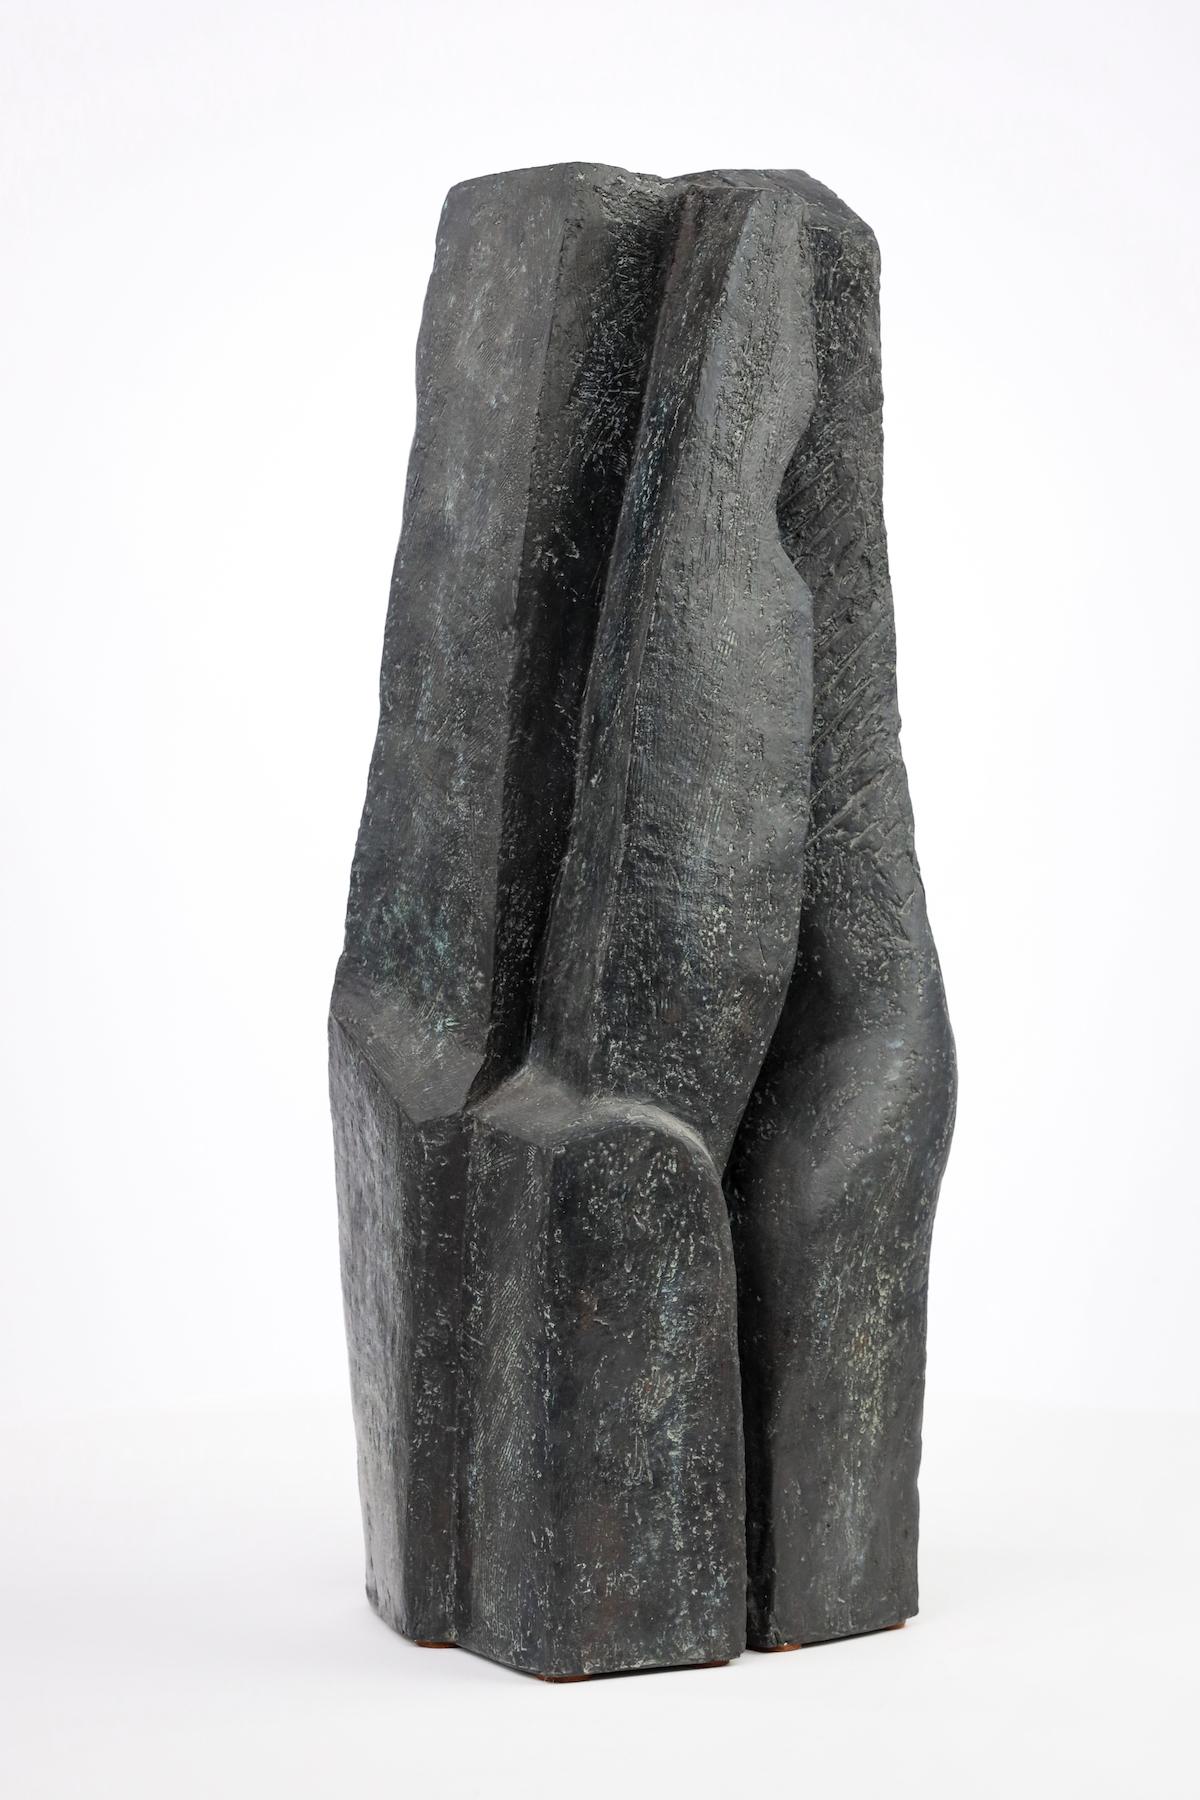 Duo by Martine Demal - Contemporary bronze sculpture, semi abstract For Sale 3